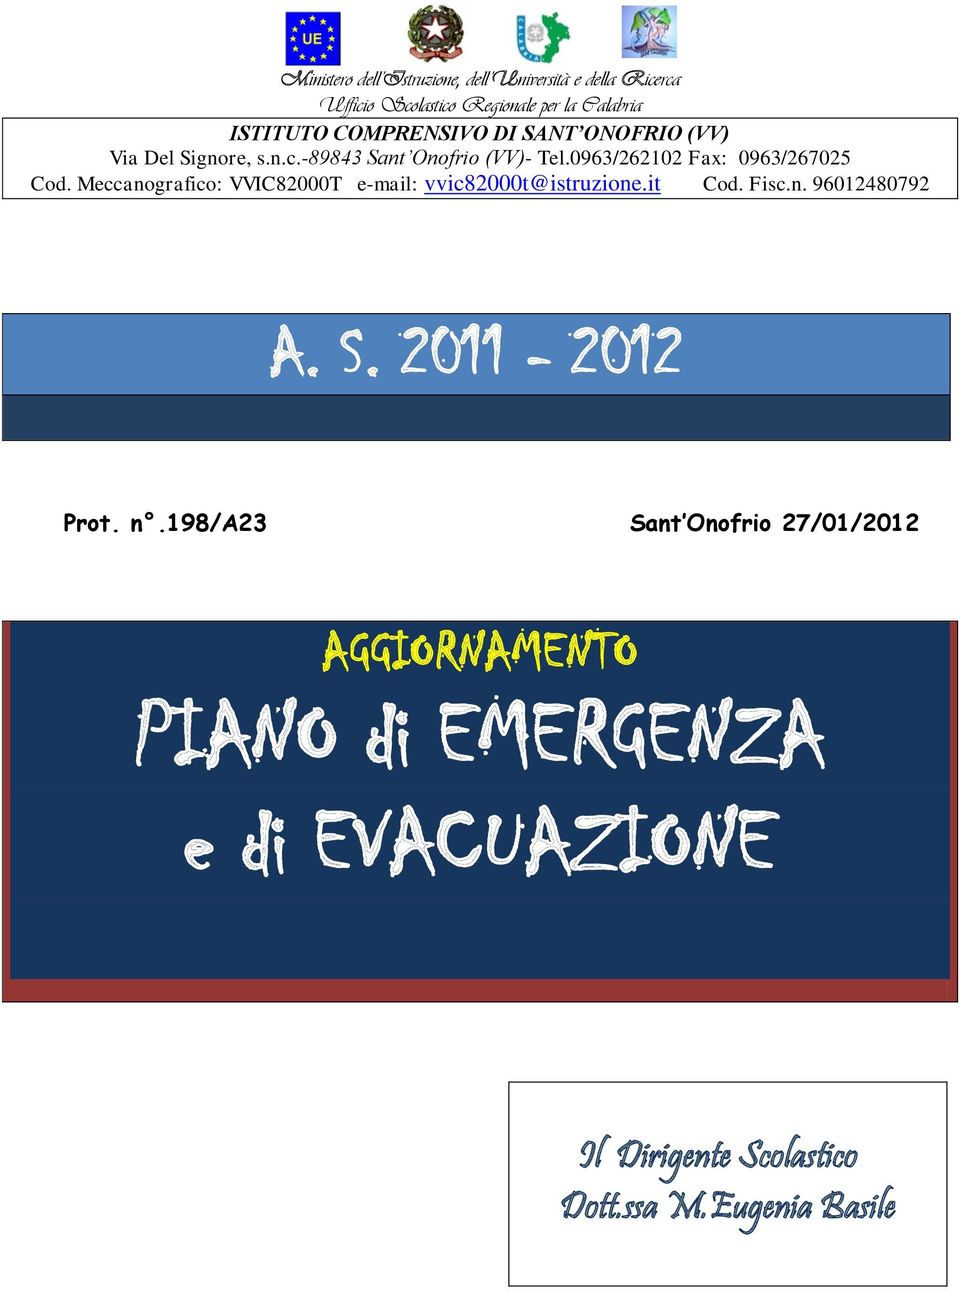 Meccanografico: VVIC82000T e-mail: vvic82000t@istruzione.it Cod. Fisc.n. 96012480792 A. S. 2011-2012 Prot. n.